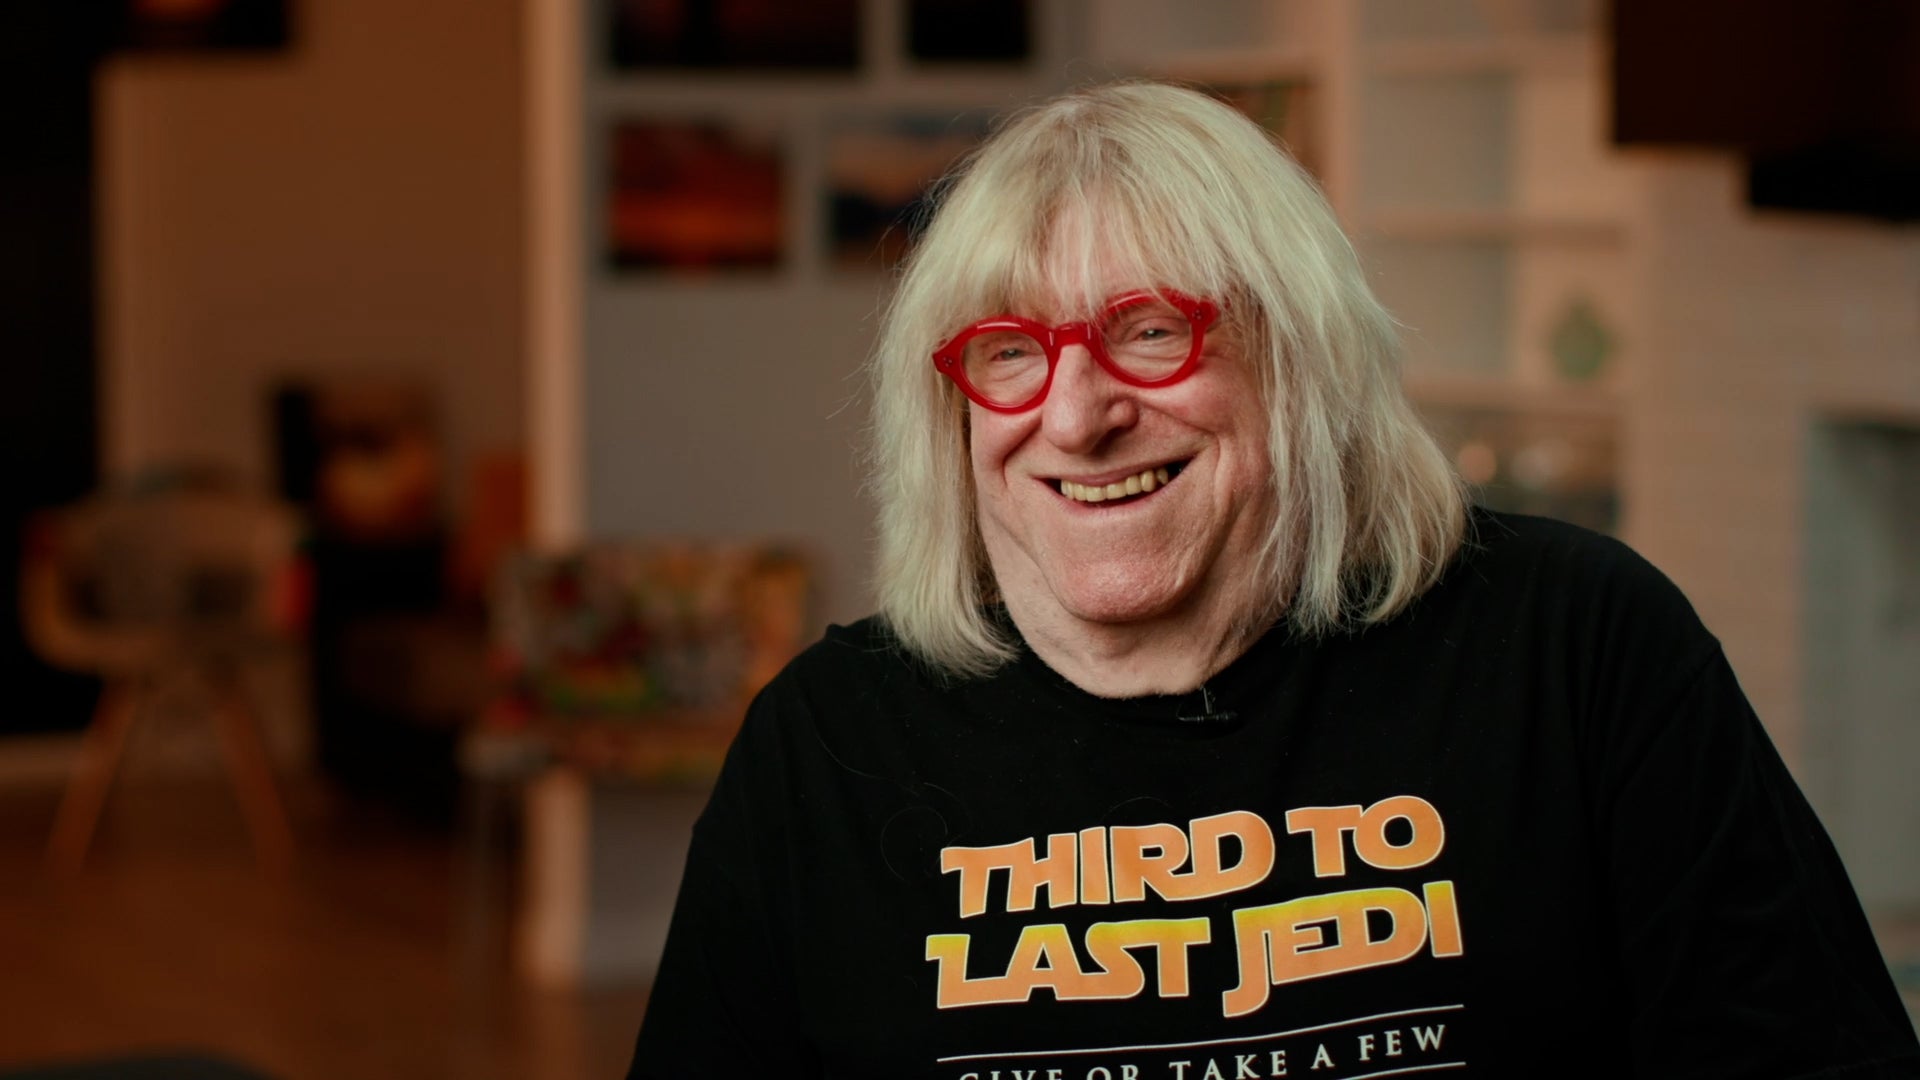 Comedy icon Bruce Vilanch was one of the writers of the Holiday Special. (Image: September Club)